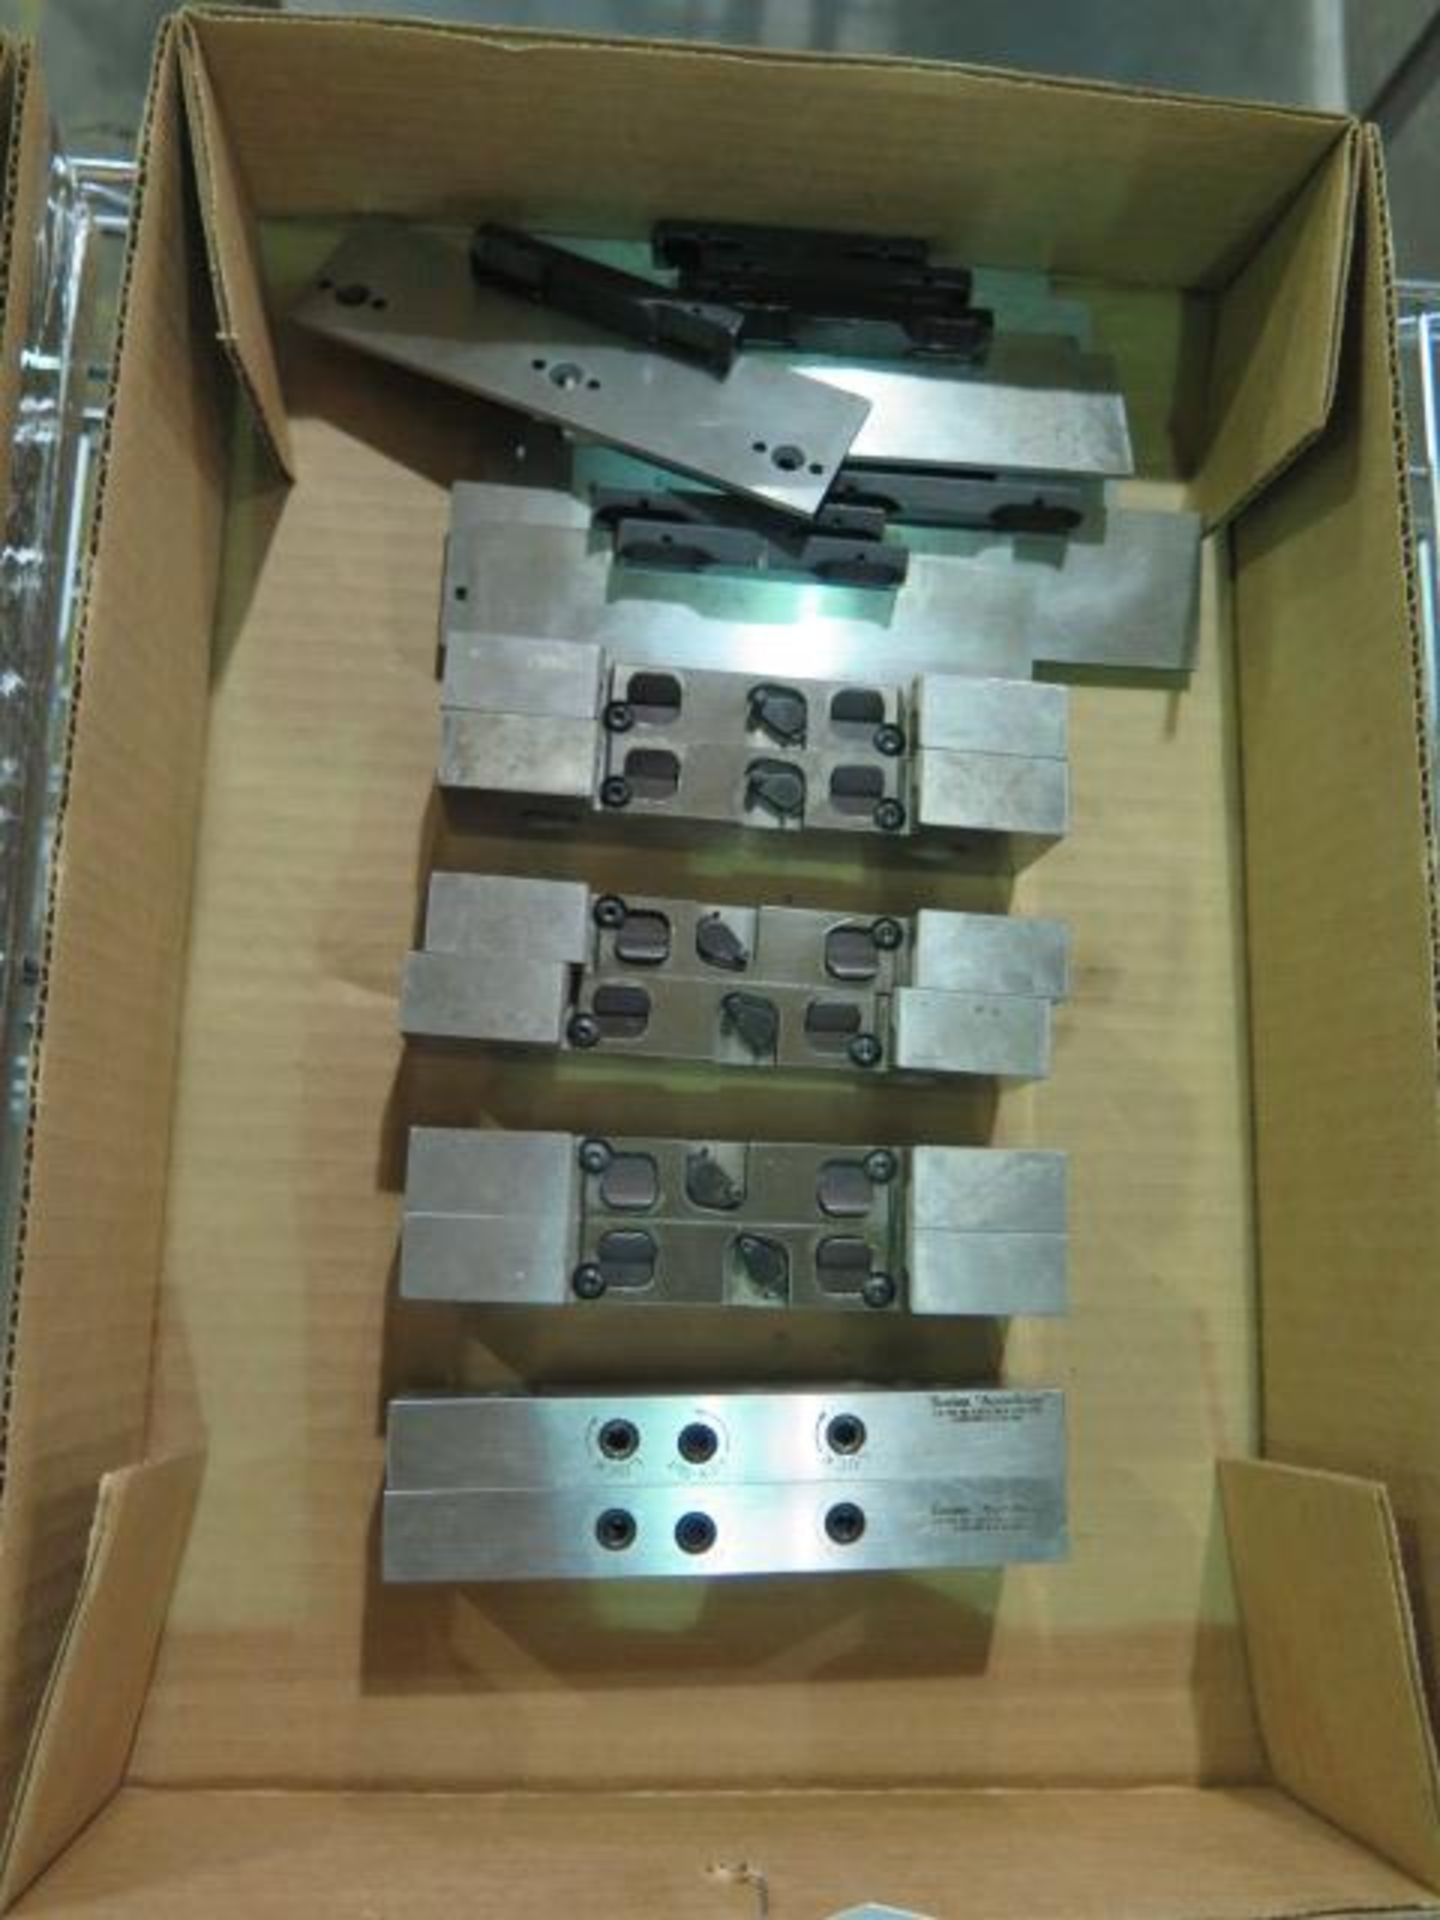 Toolex "Accu-Snap" 6" Master Jaw Sets (4) w/ Snap-In Parallel Sets (SOLD AS-IS - NO WARRANTY) - Image 2 of 6